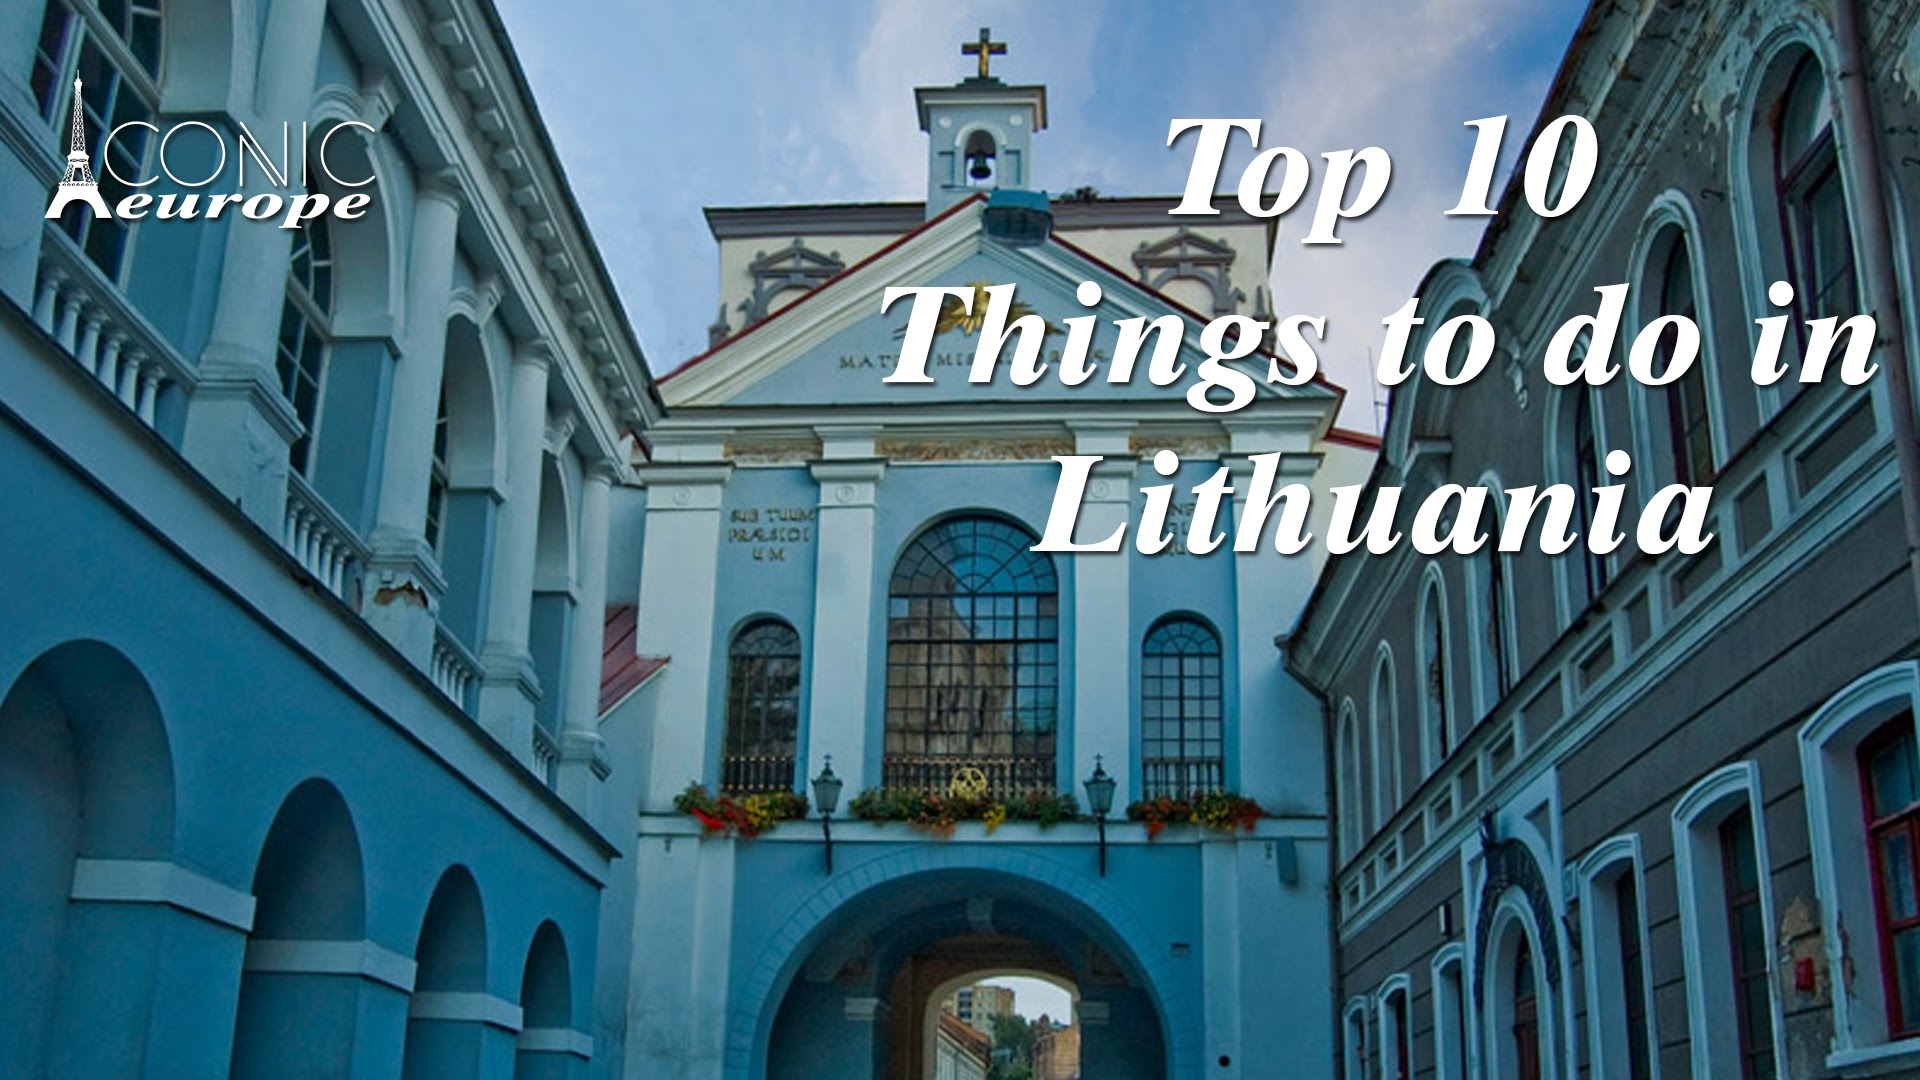 Top 10 Things to do in Lithuania - YouTube